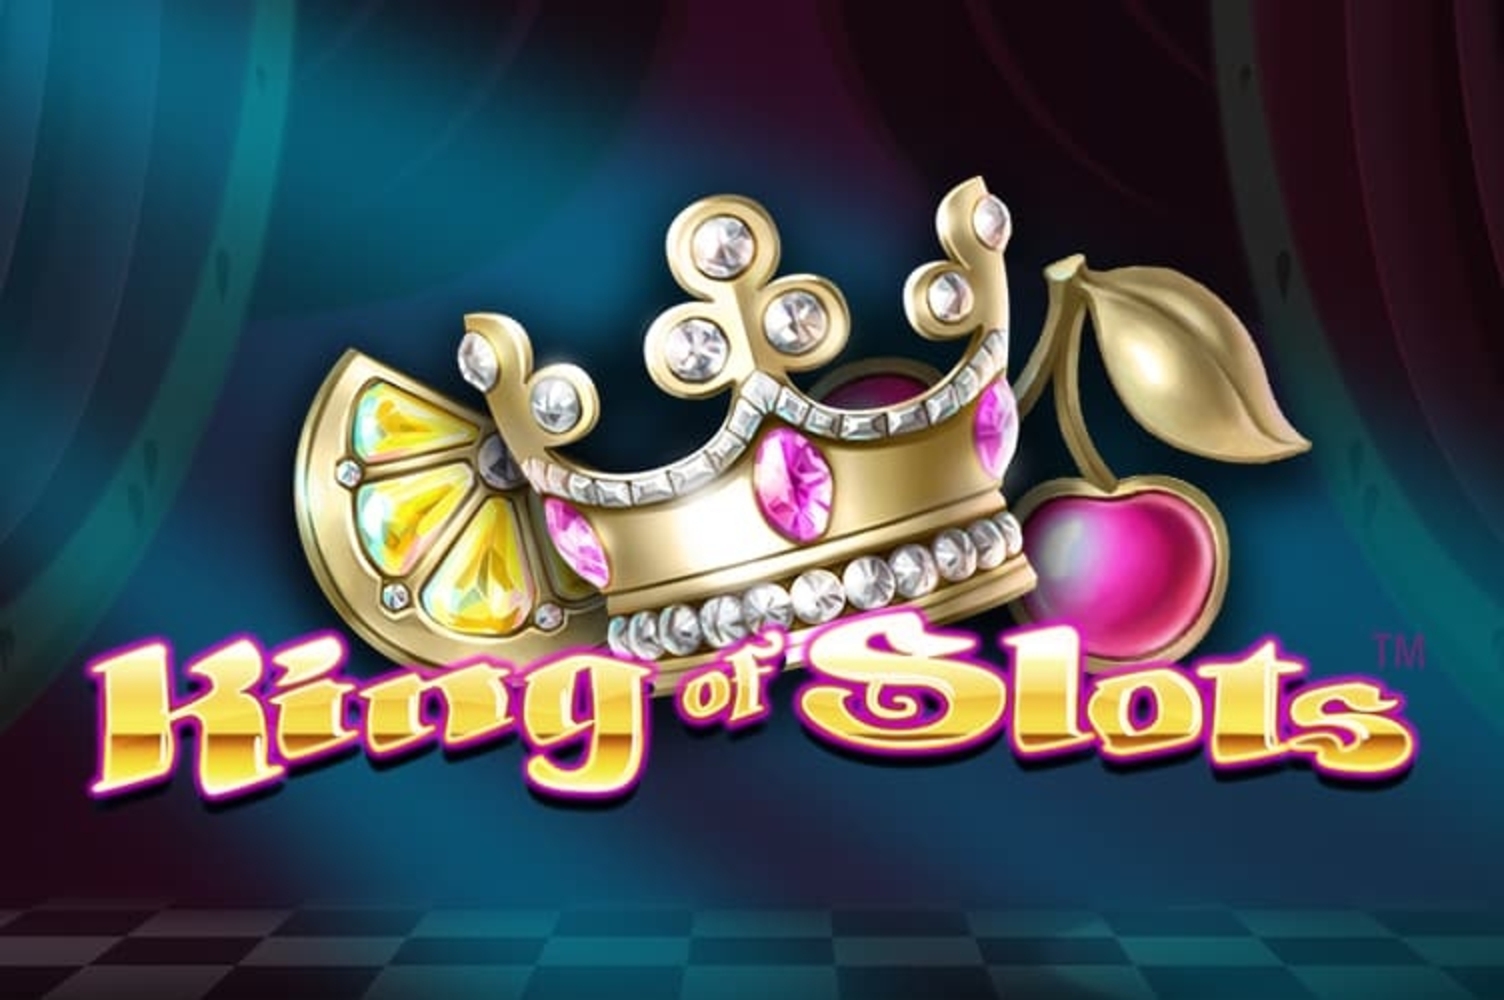 The King of Slots Online Slot Demo Game by NetEnt